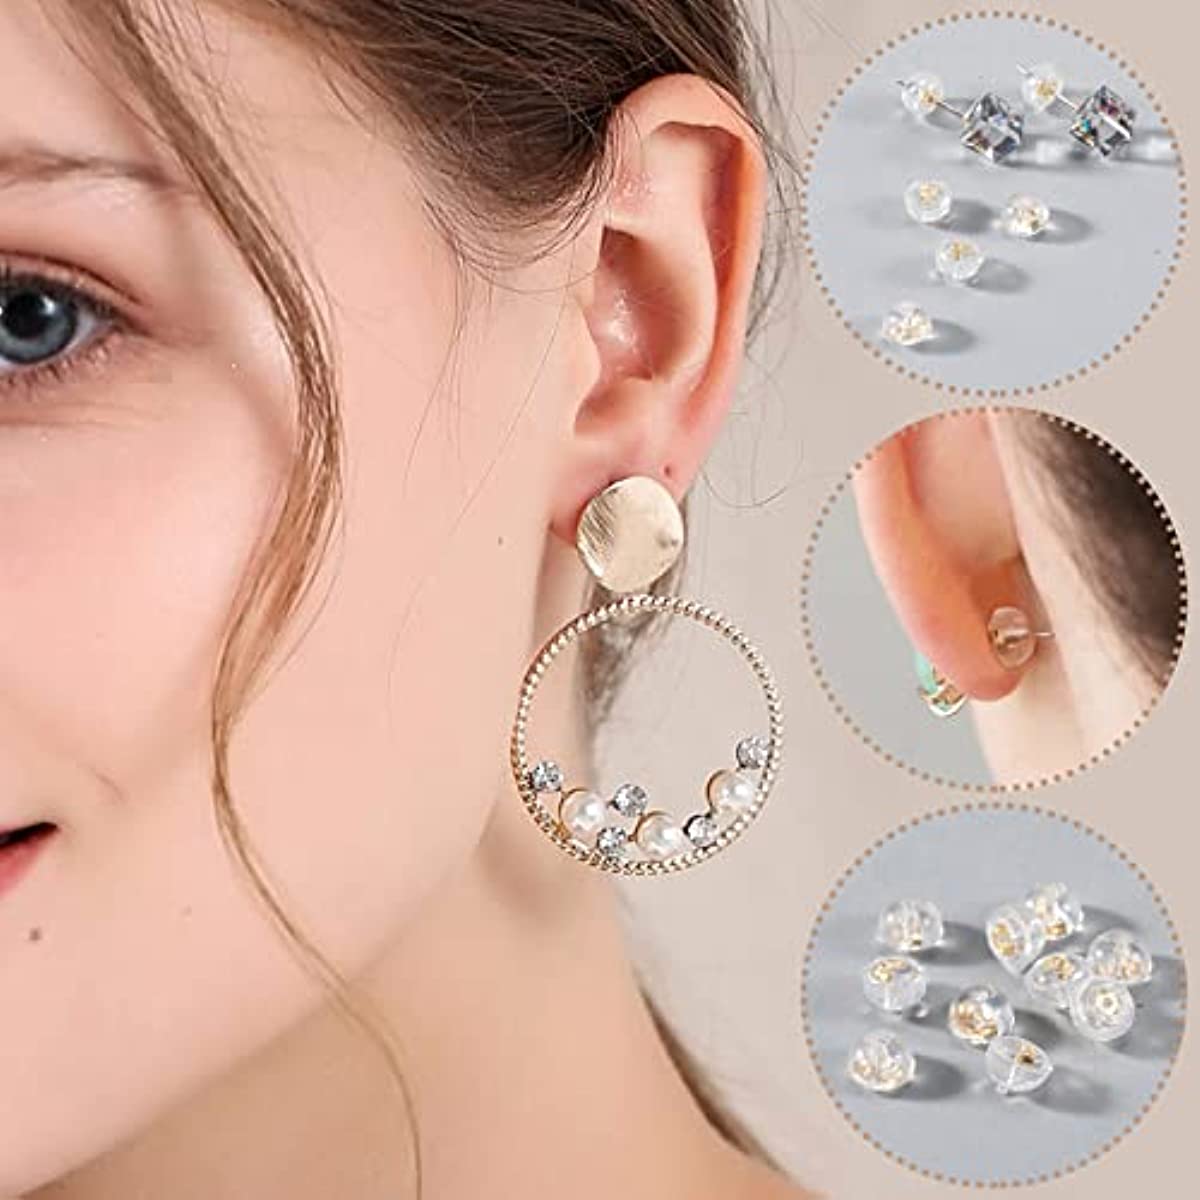 20 Pcs Silicone Earring Backs Clear Earrings for Sports Studs